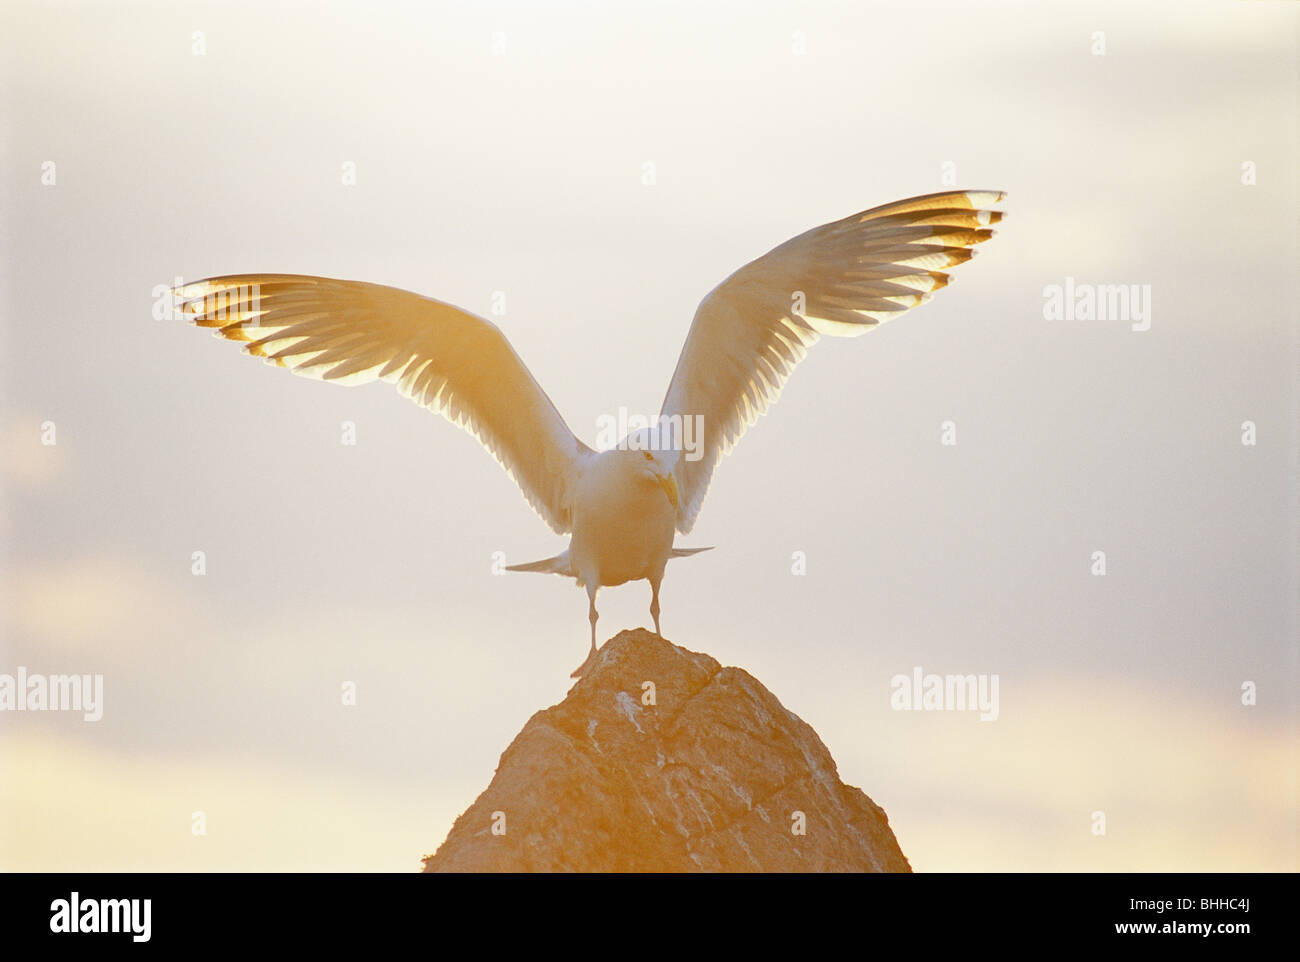 A herring gull with outspread wings, Sweden. Stock Photo